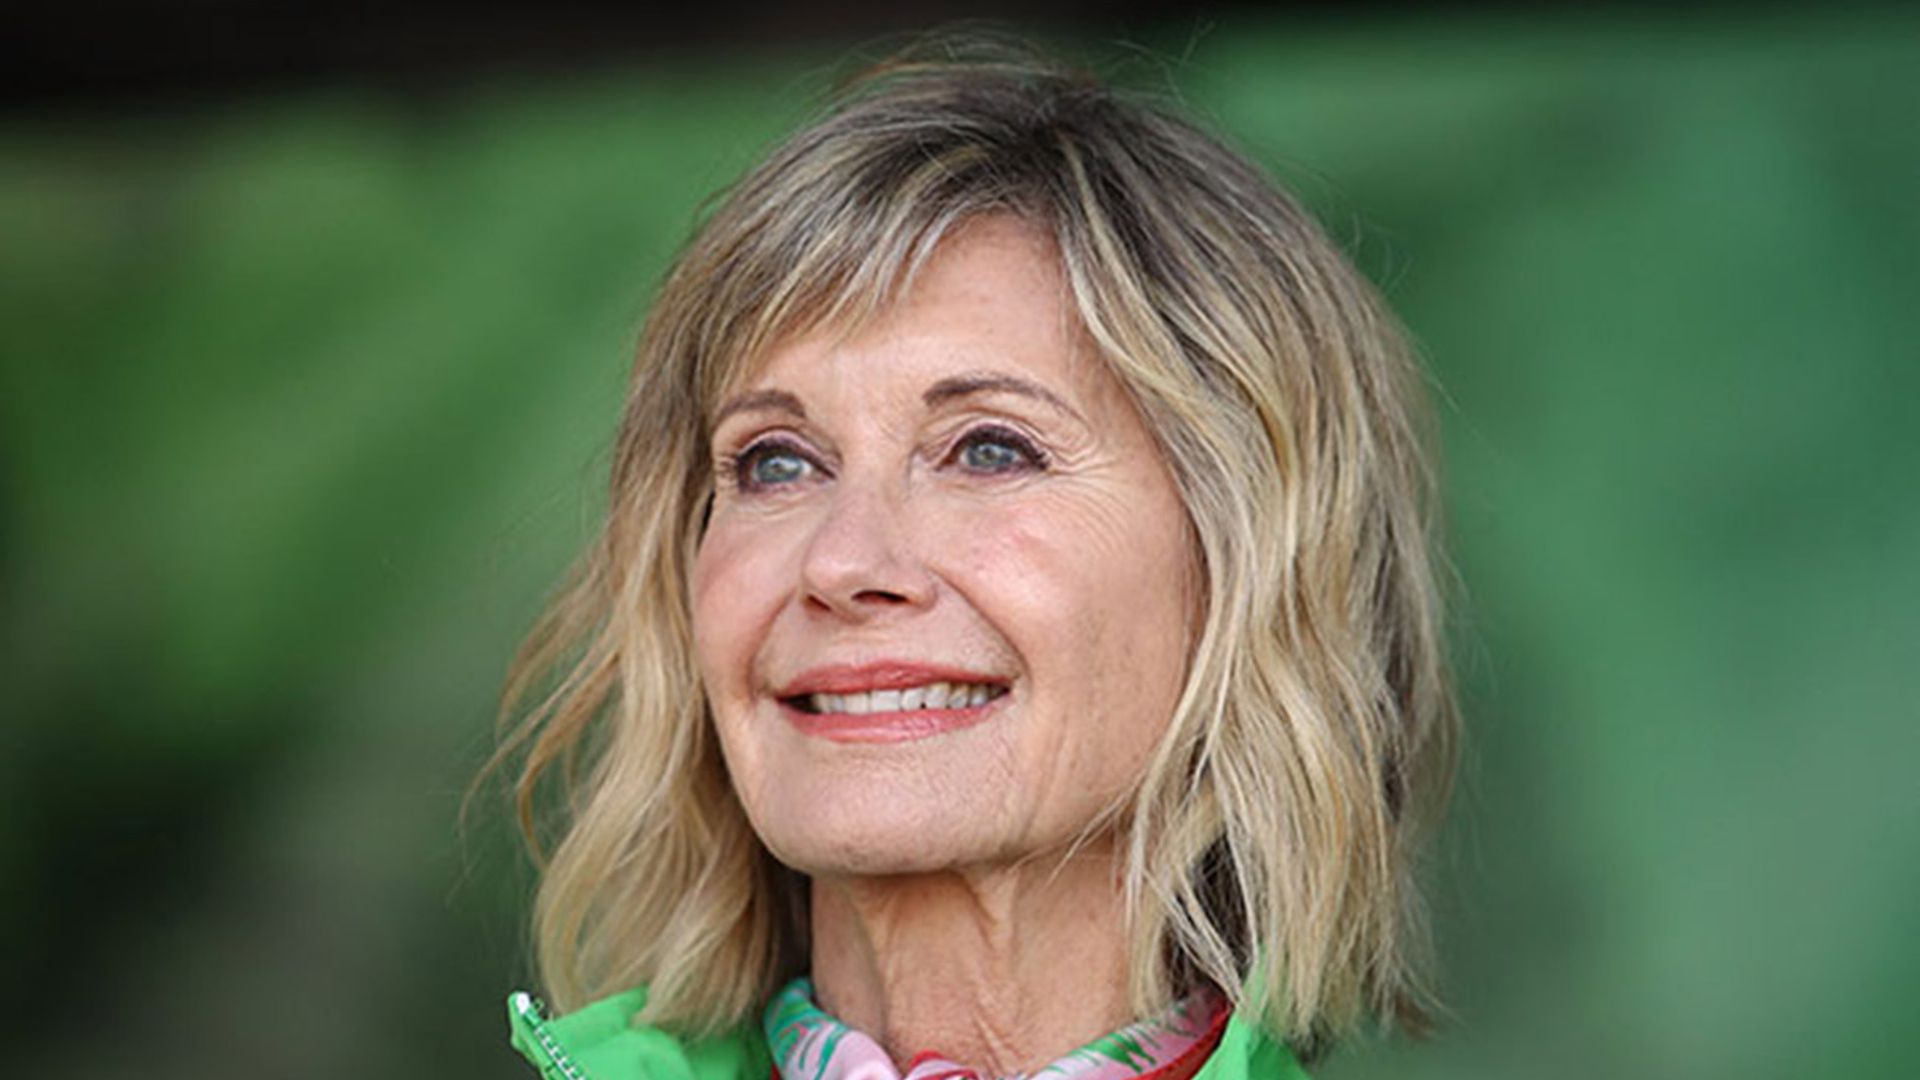 Olivia Newton-John in tears after receiving emotional message following latest cancer update